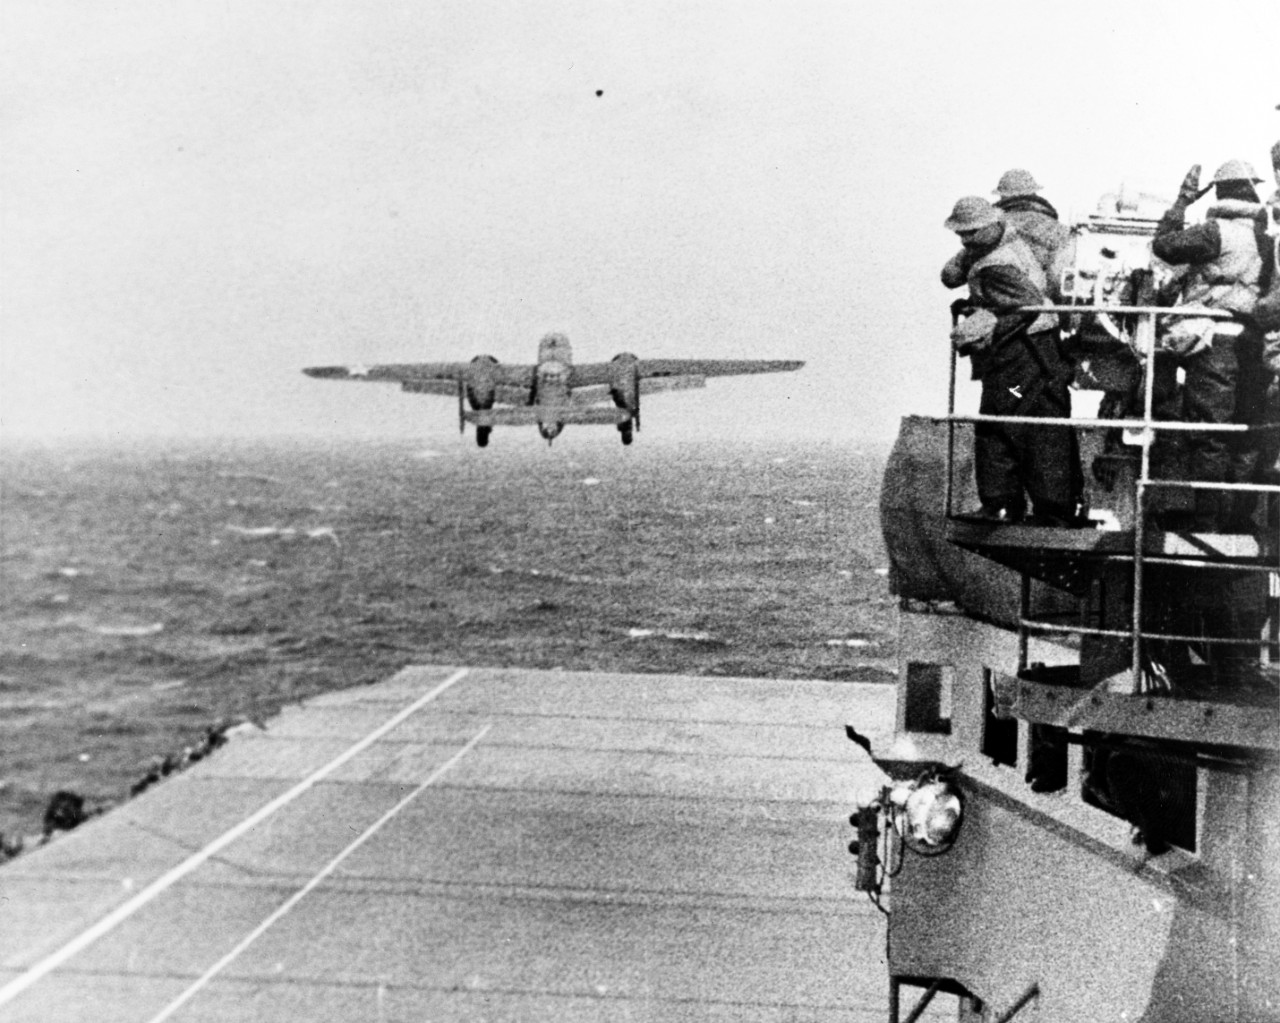 One of the Mitchells takes off from the pitching ship at the start of the raid to bomb the enemy, 18 April 1942. Sailors watch the momentous launch from the signal lamp platform on the right. (U.S. Navy Photograph 80-G-41196, National Archives an...